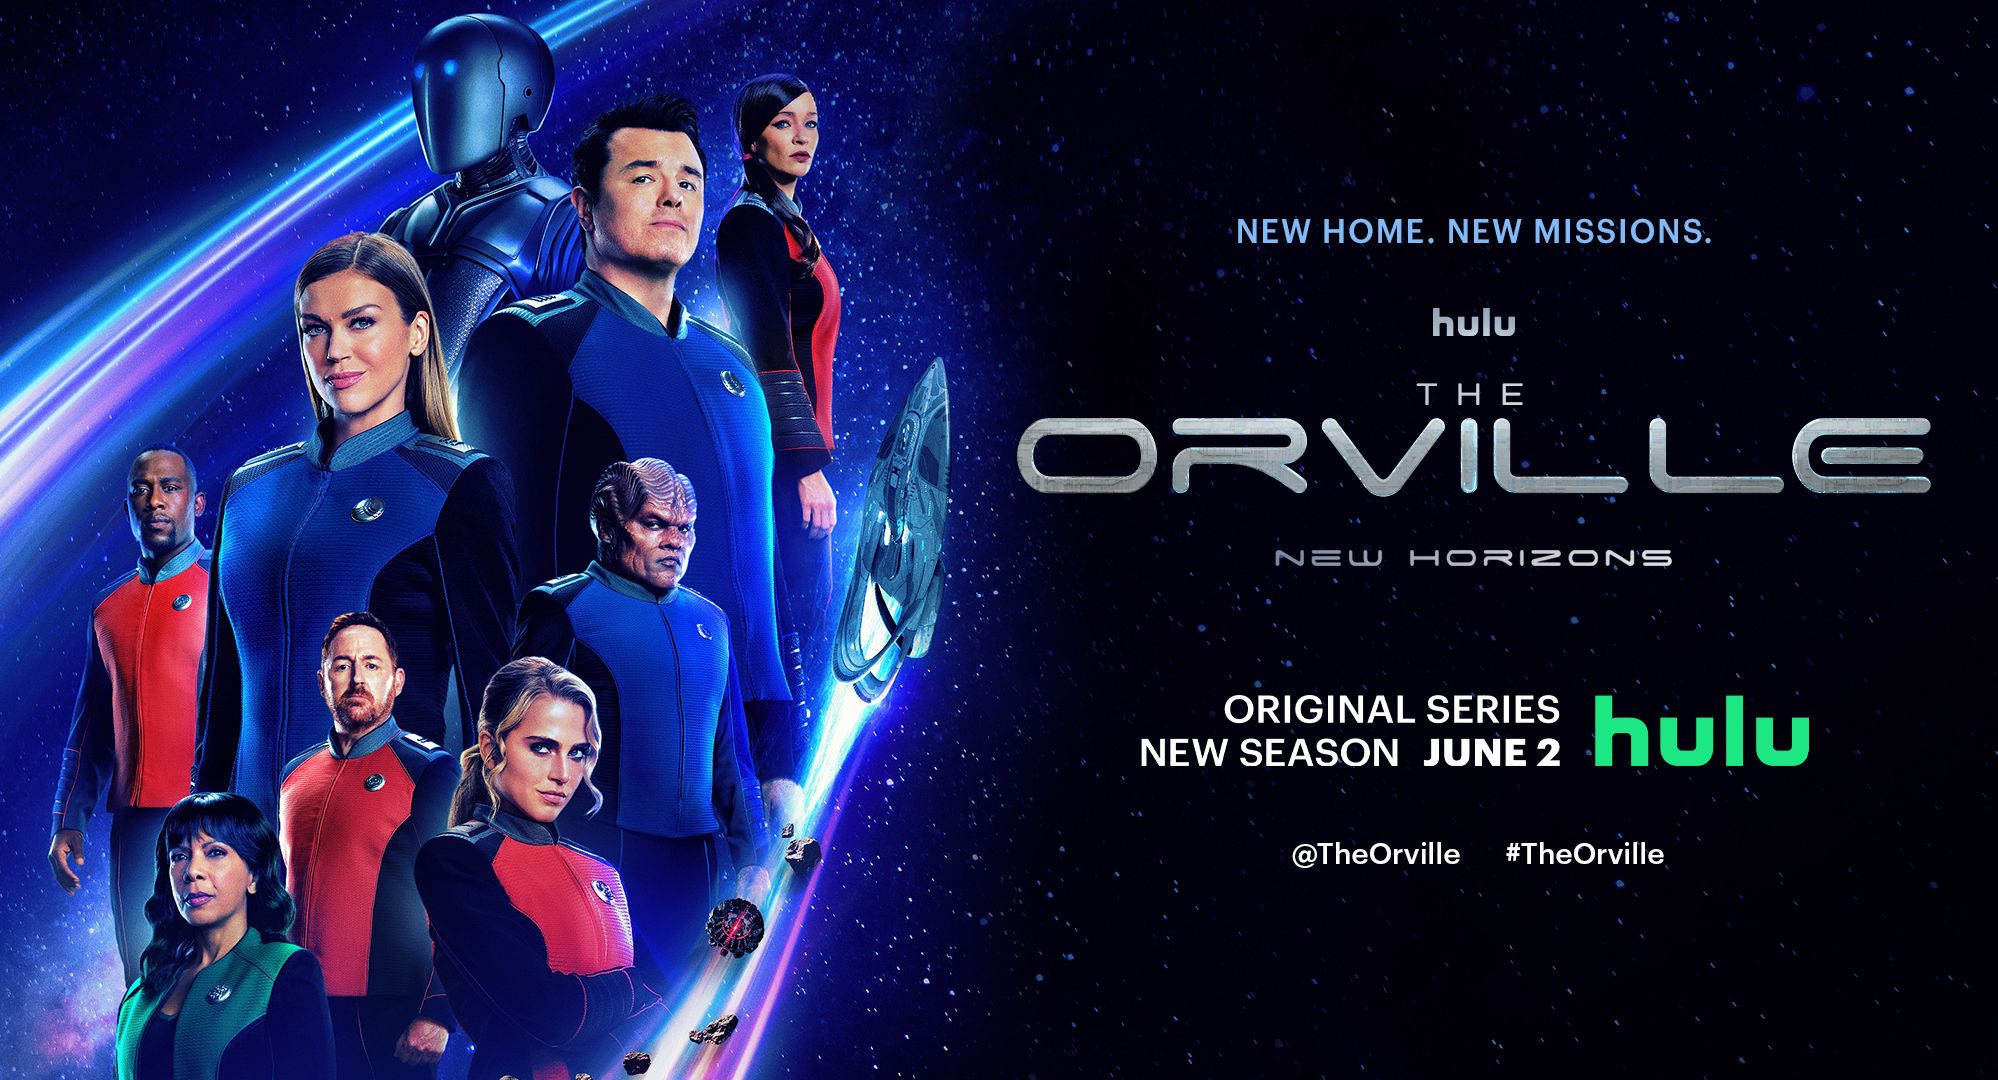 the orville new horizons poster